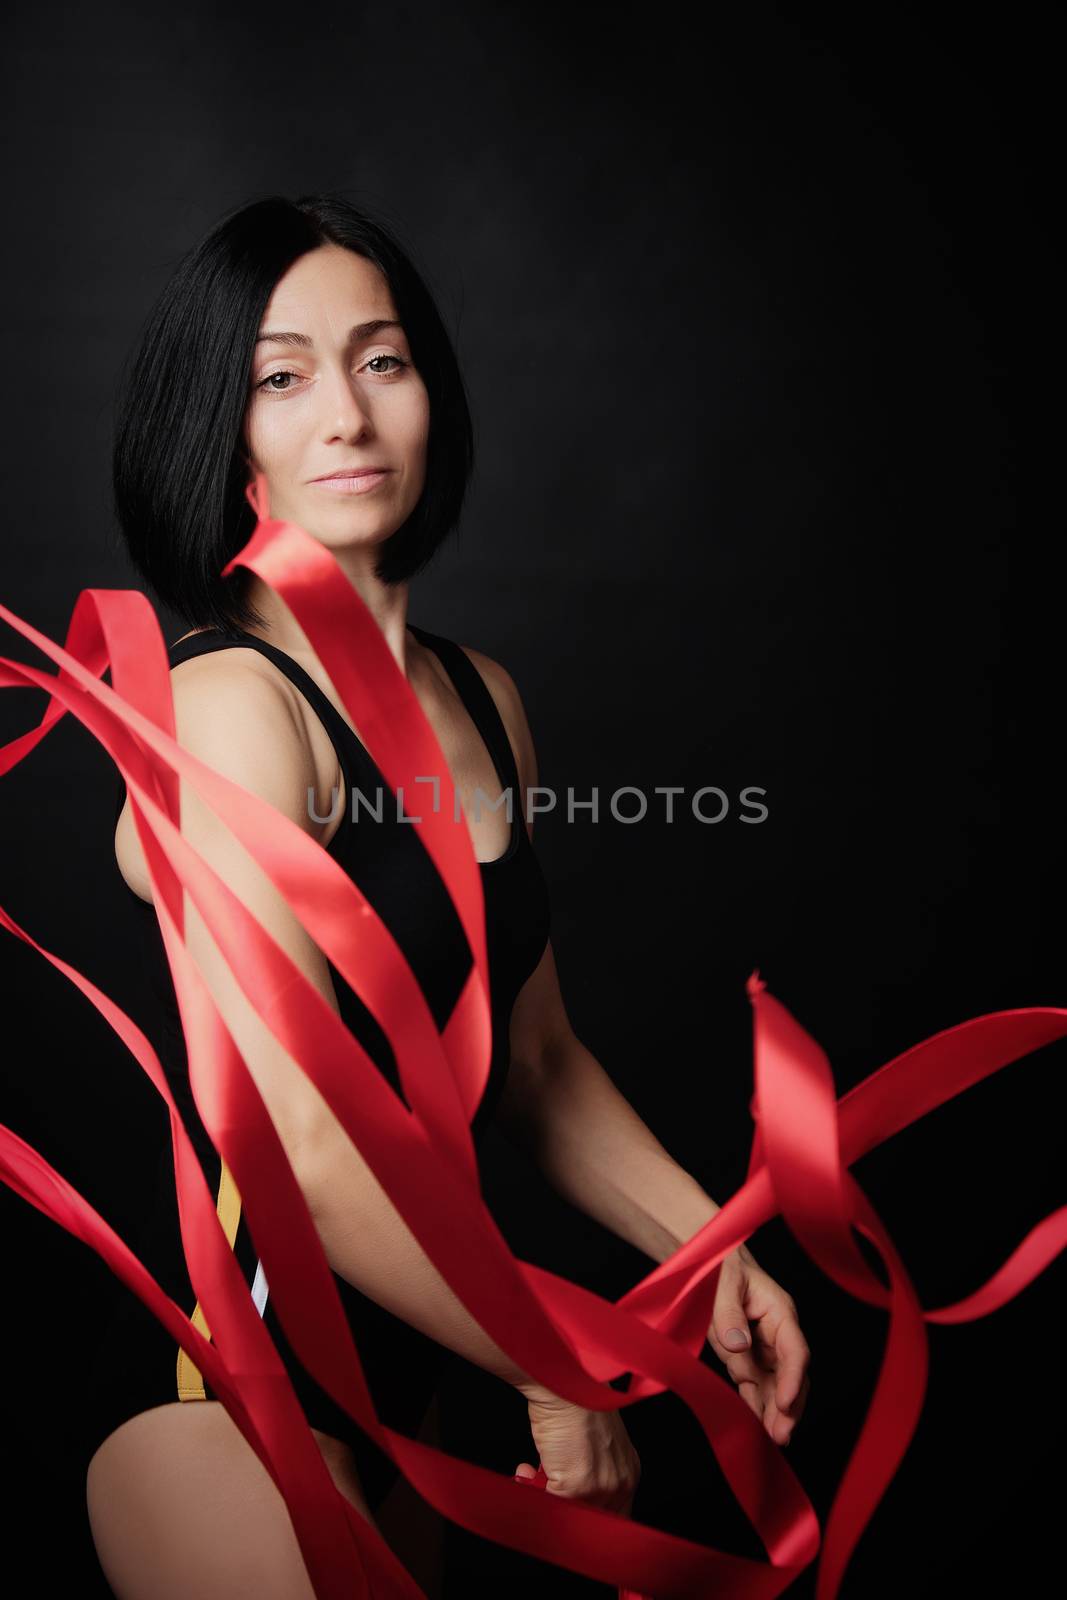 young woman gymnast of Caucasian appearance with black hair spin by ndanko